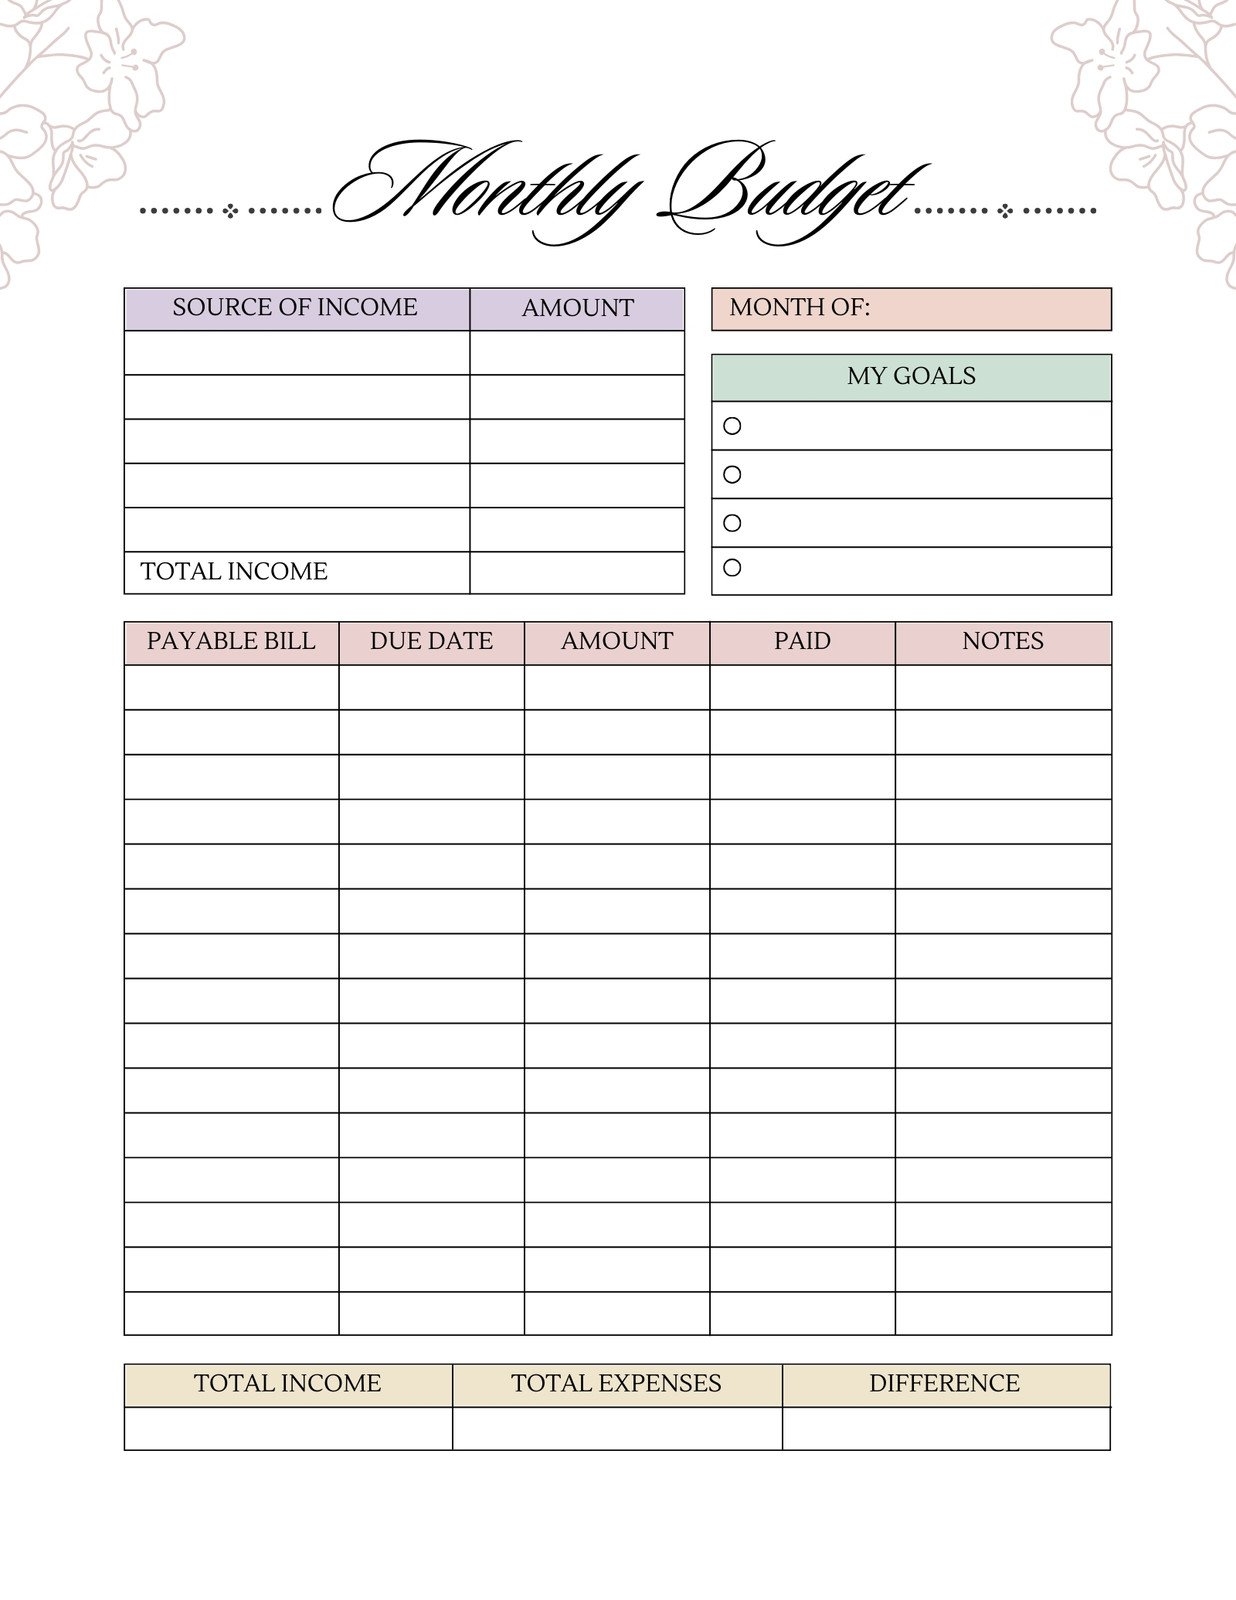 Free And Customizable Budget Templates - Free Printable Budget Templates